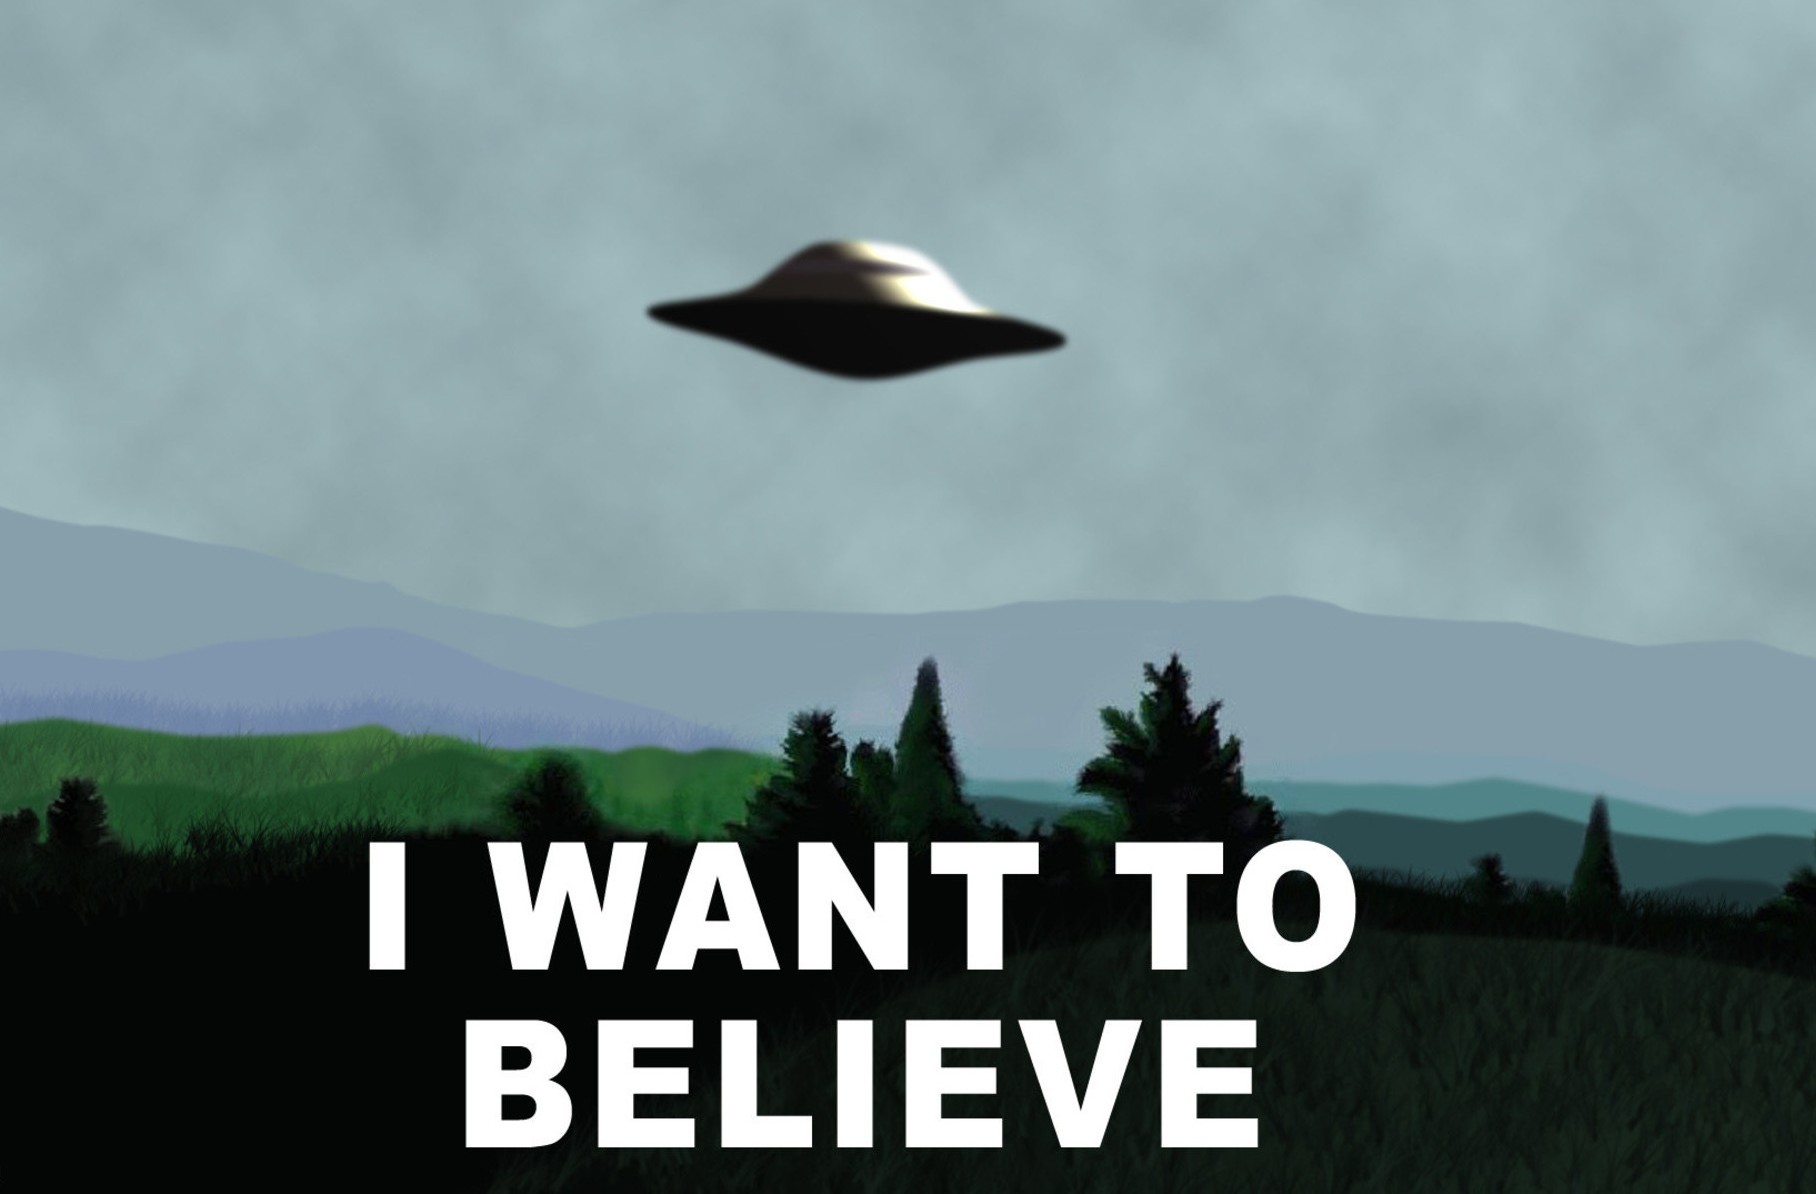 I want see you tonight. Плакат секретные материалы i want to believe. I want to believe Постер Малдера. Постер x files i want to believe. Секретные материалы хочу верить плакат.